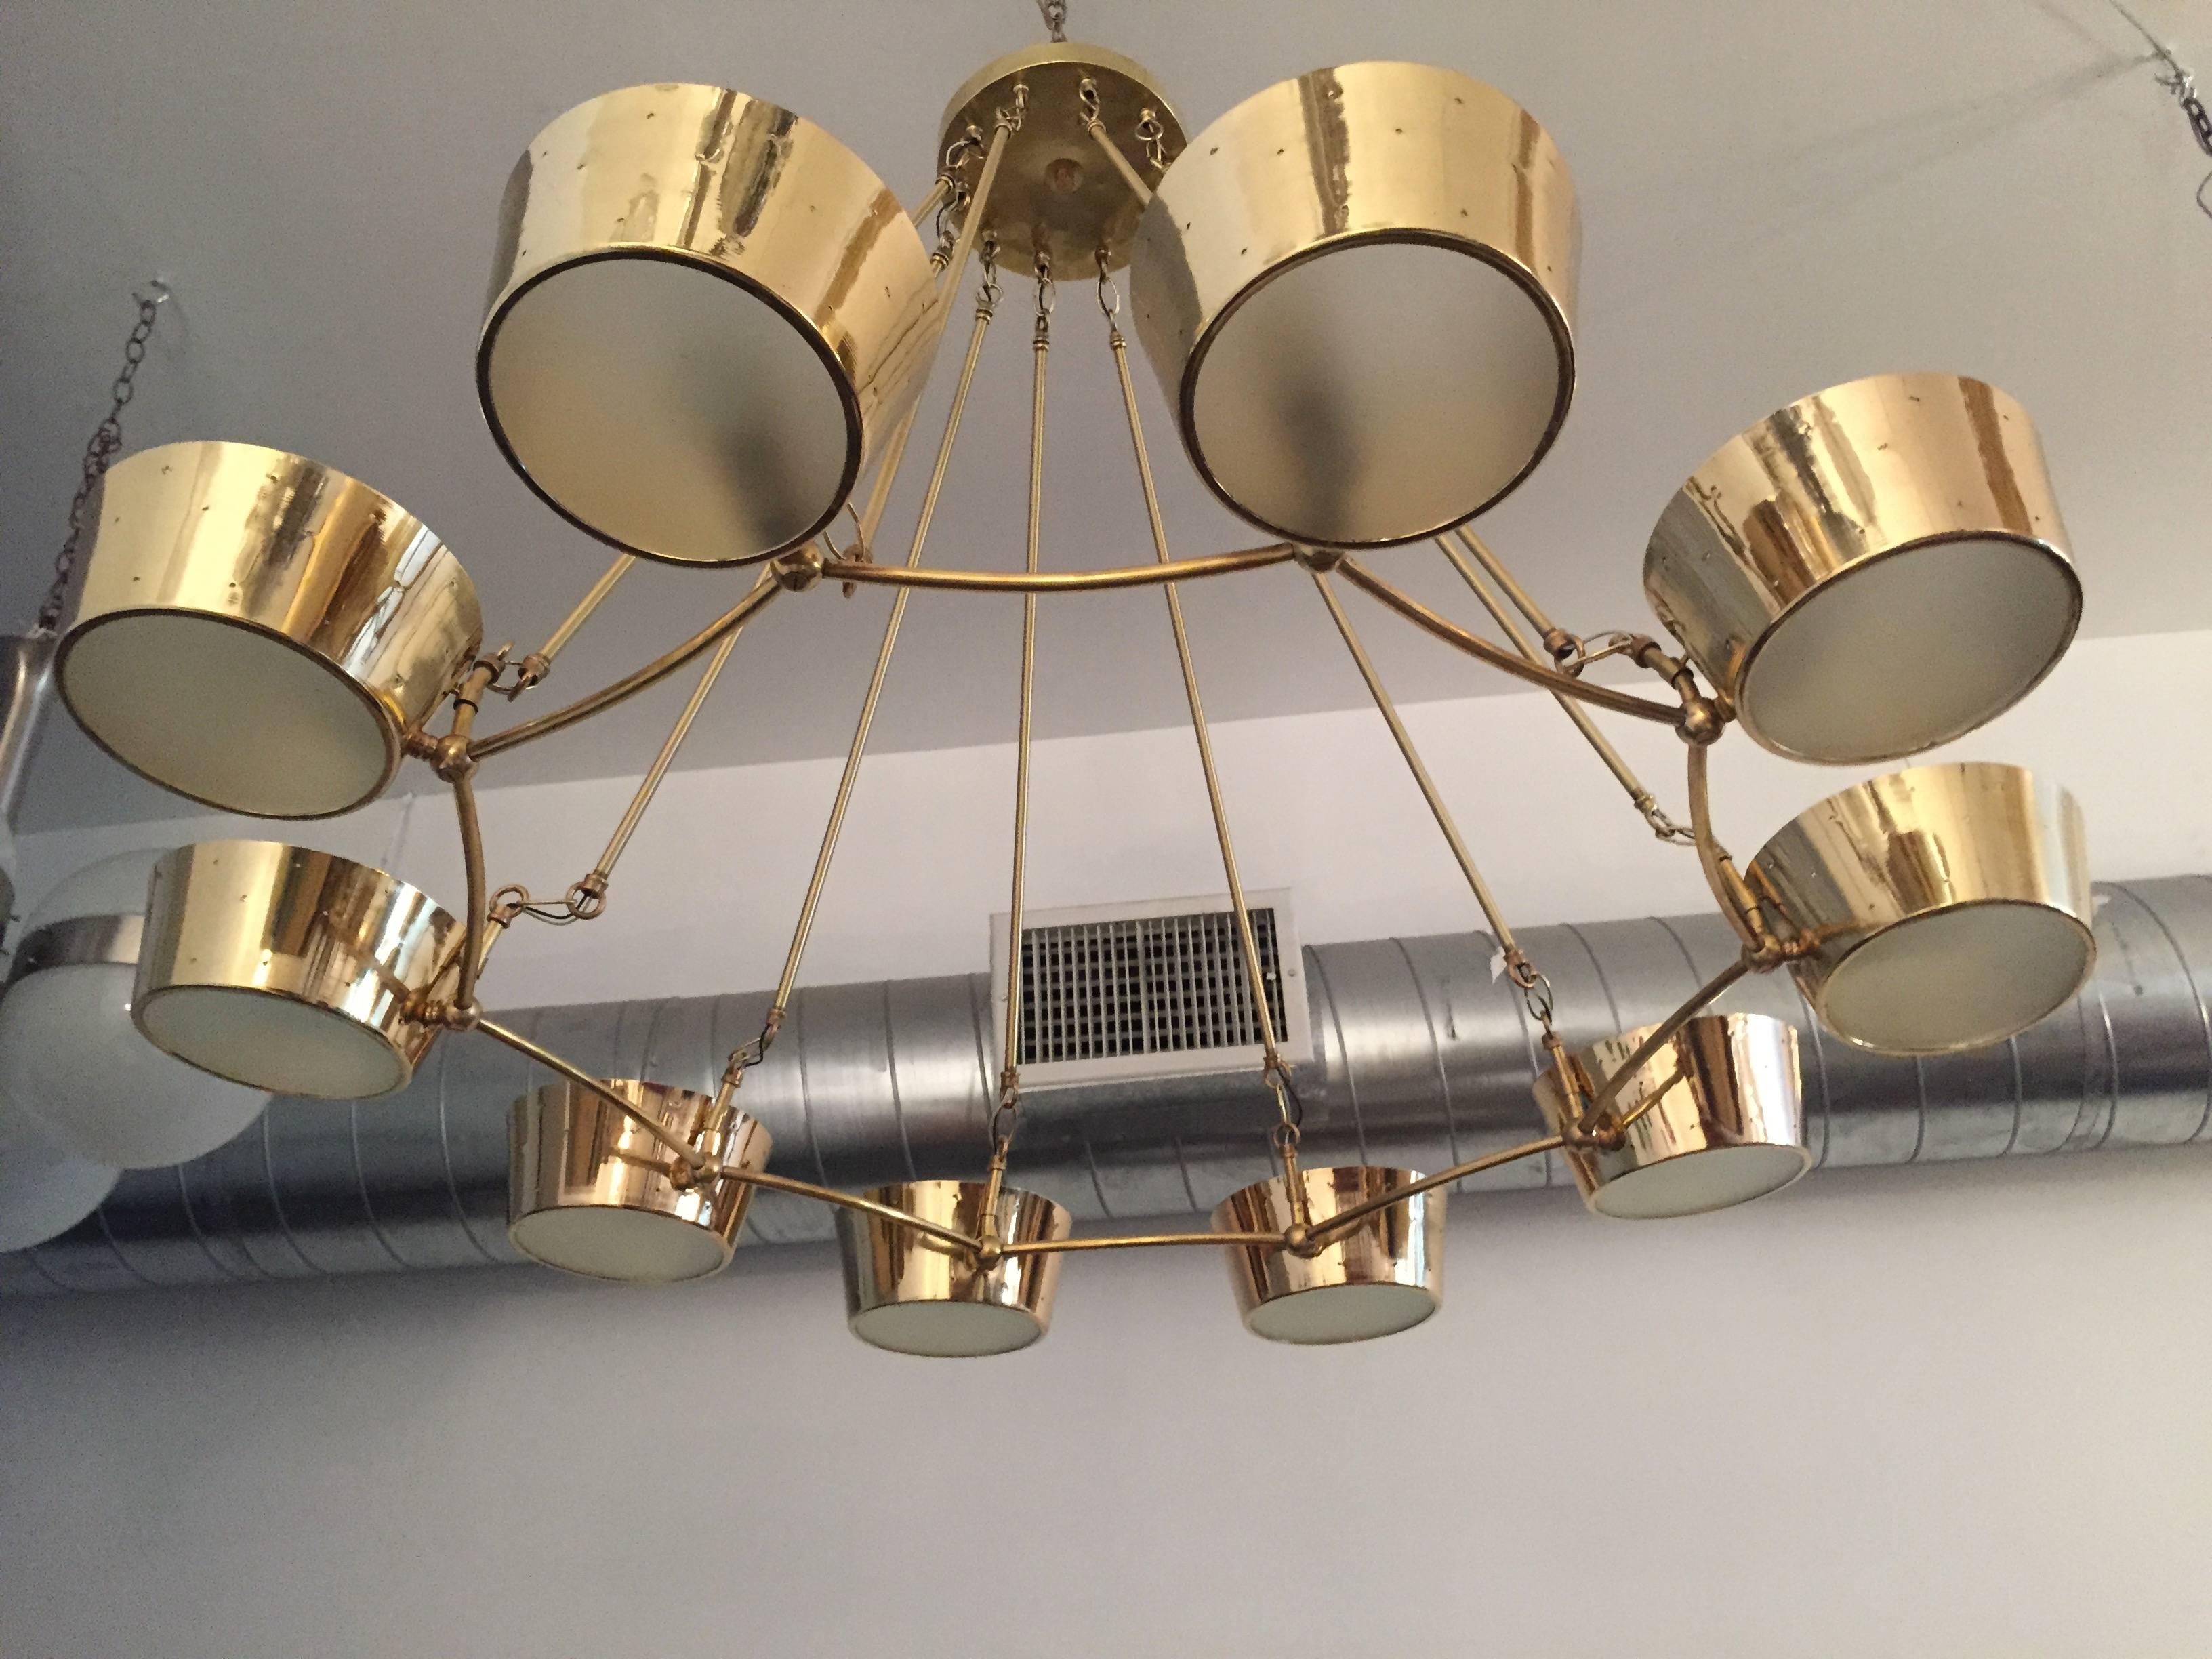 A wonderful American, 1950s Mid-Century Modern chandelier by famed lighting company, Lightolier. The large chandelier is composed of a polished brass body with perforated holes that emit light and frosted glass shades. Ten light sources up to 800